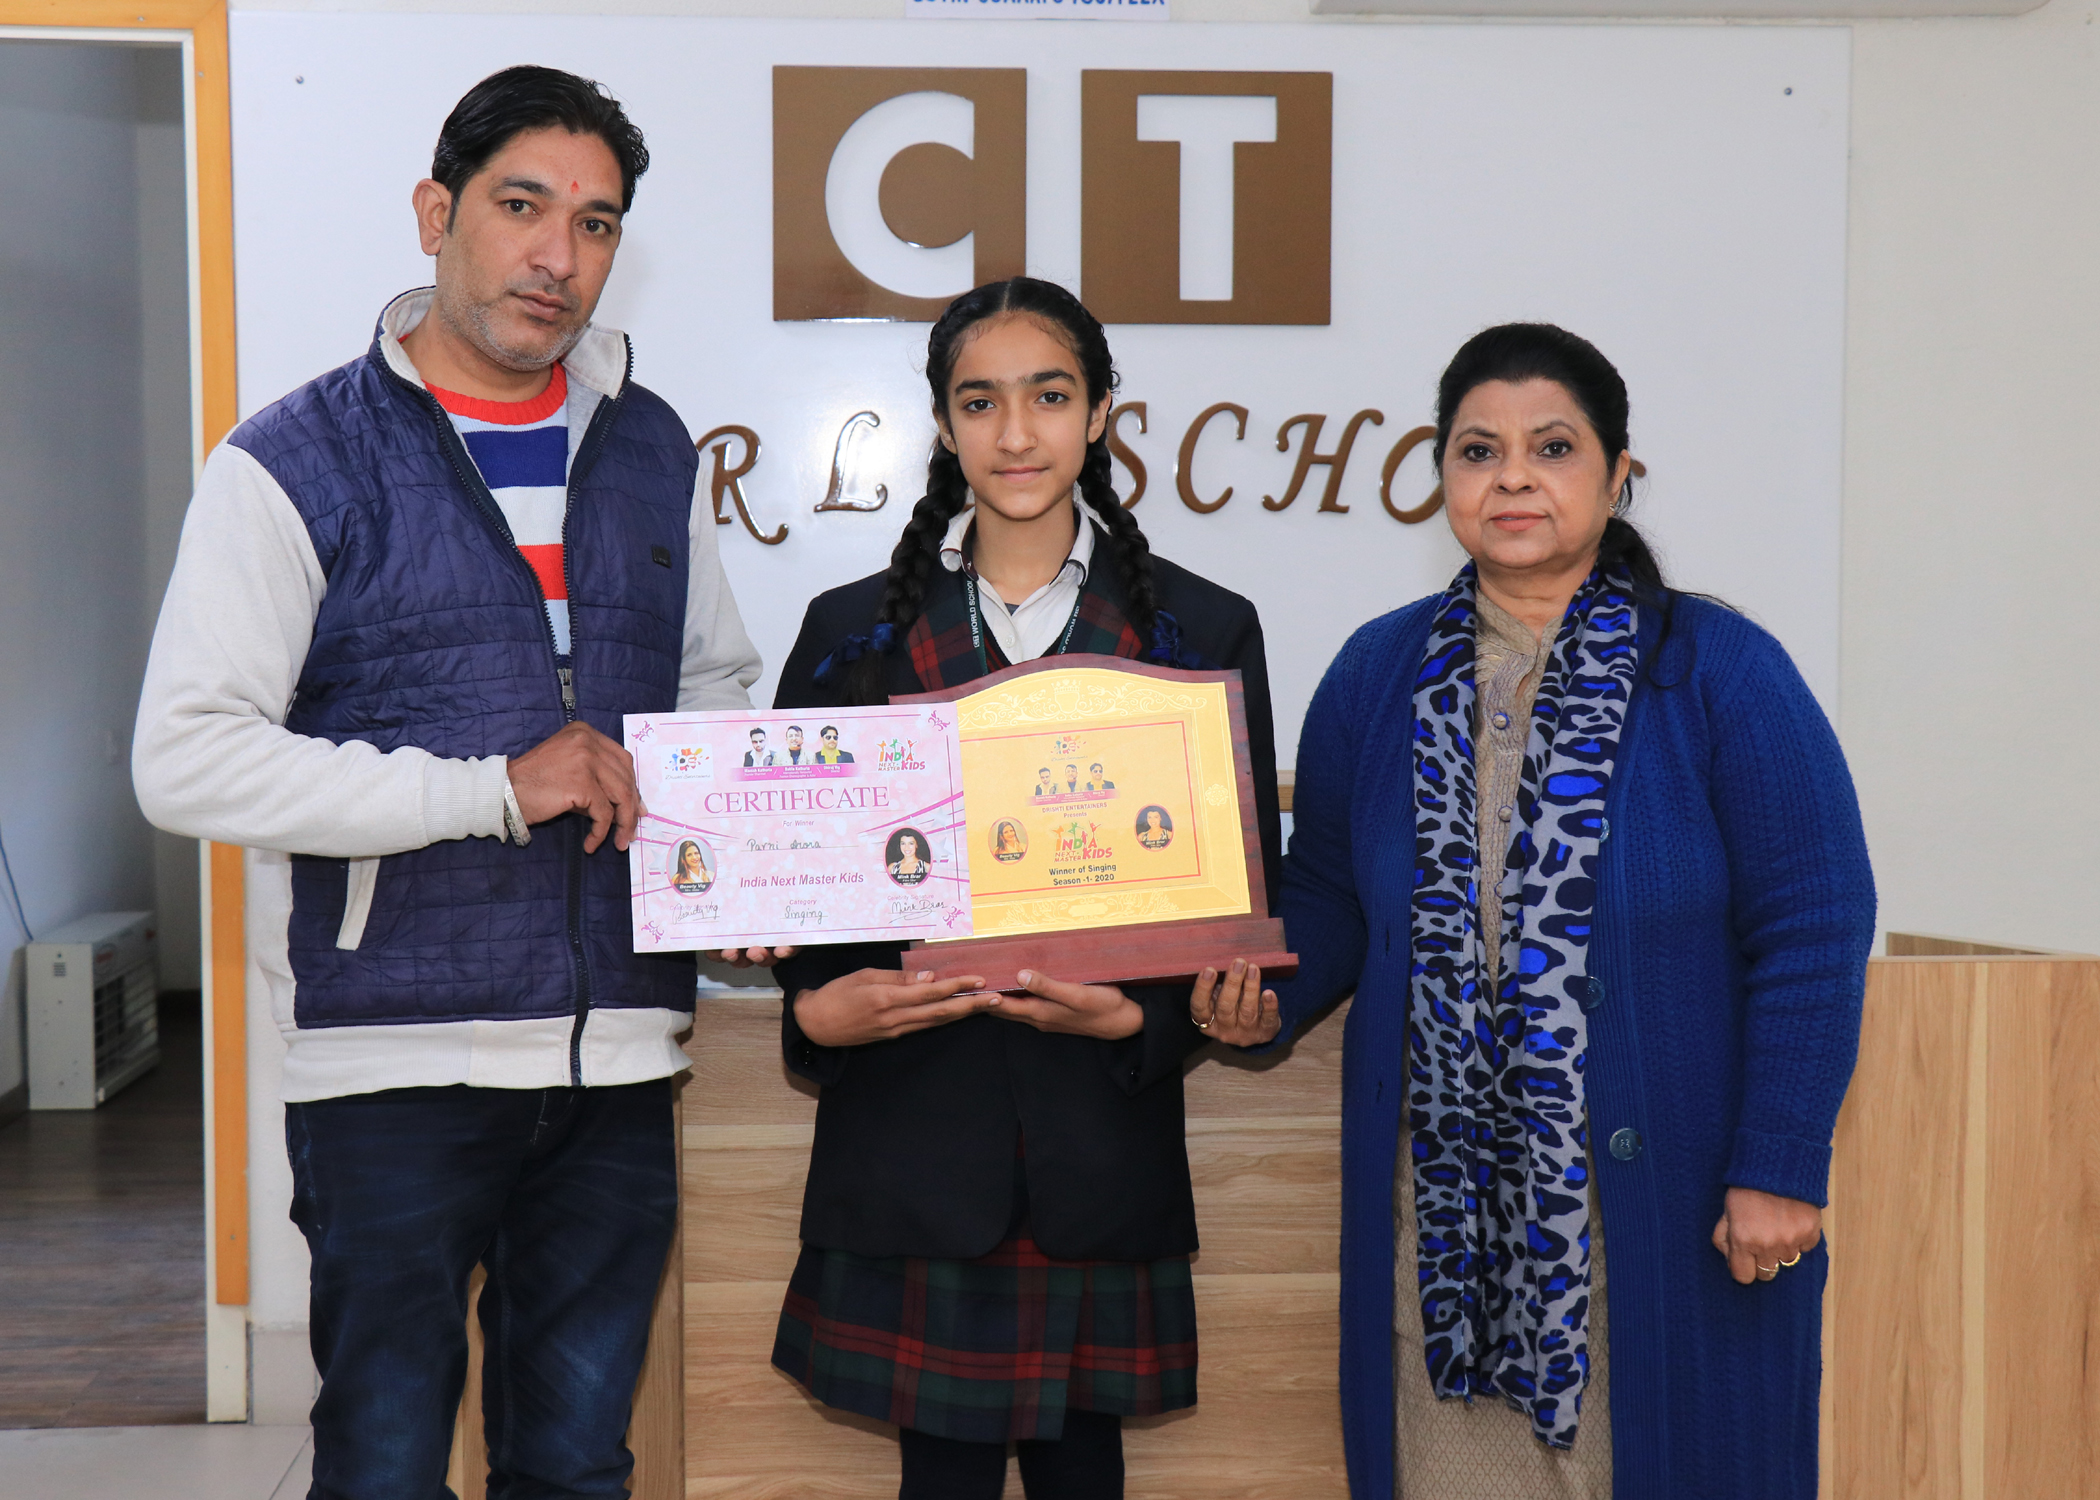 CT World’s Pavni Arora bags the title of India’s Next Master Kids Show